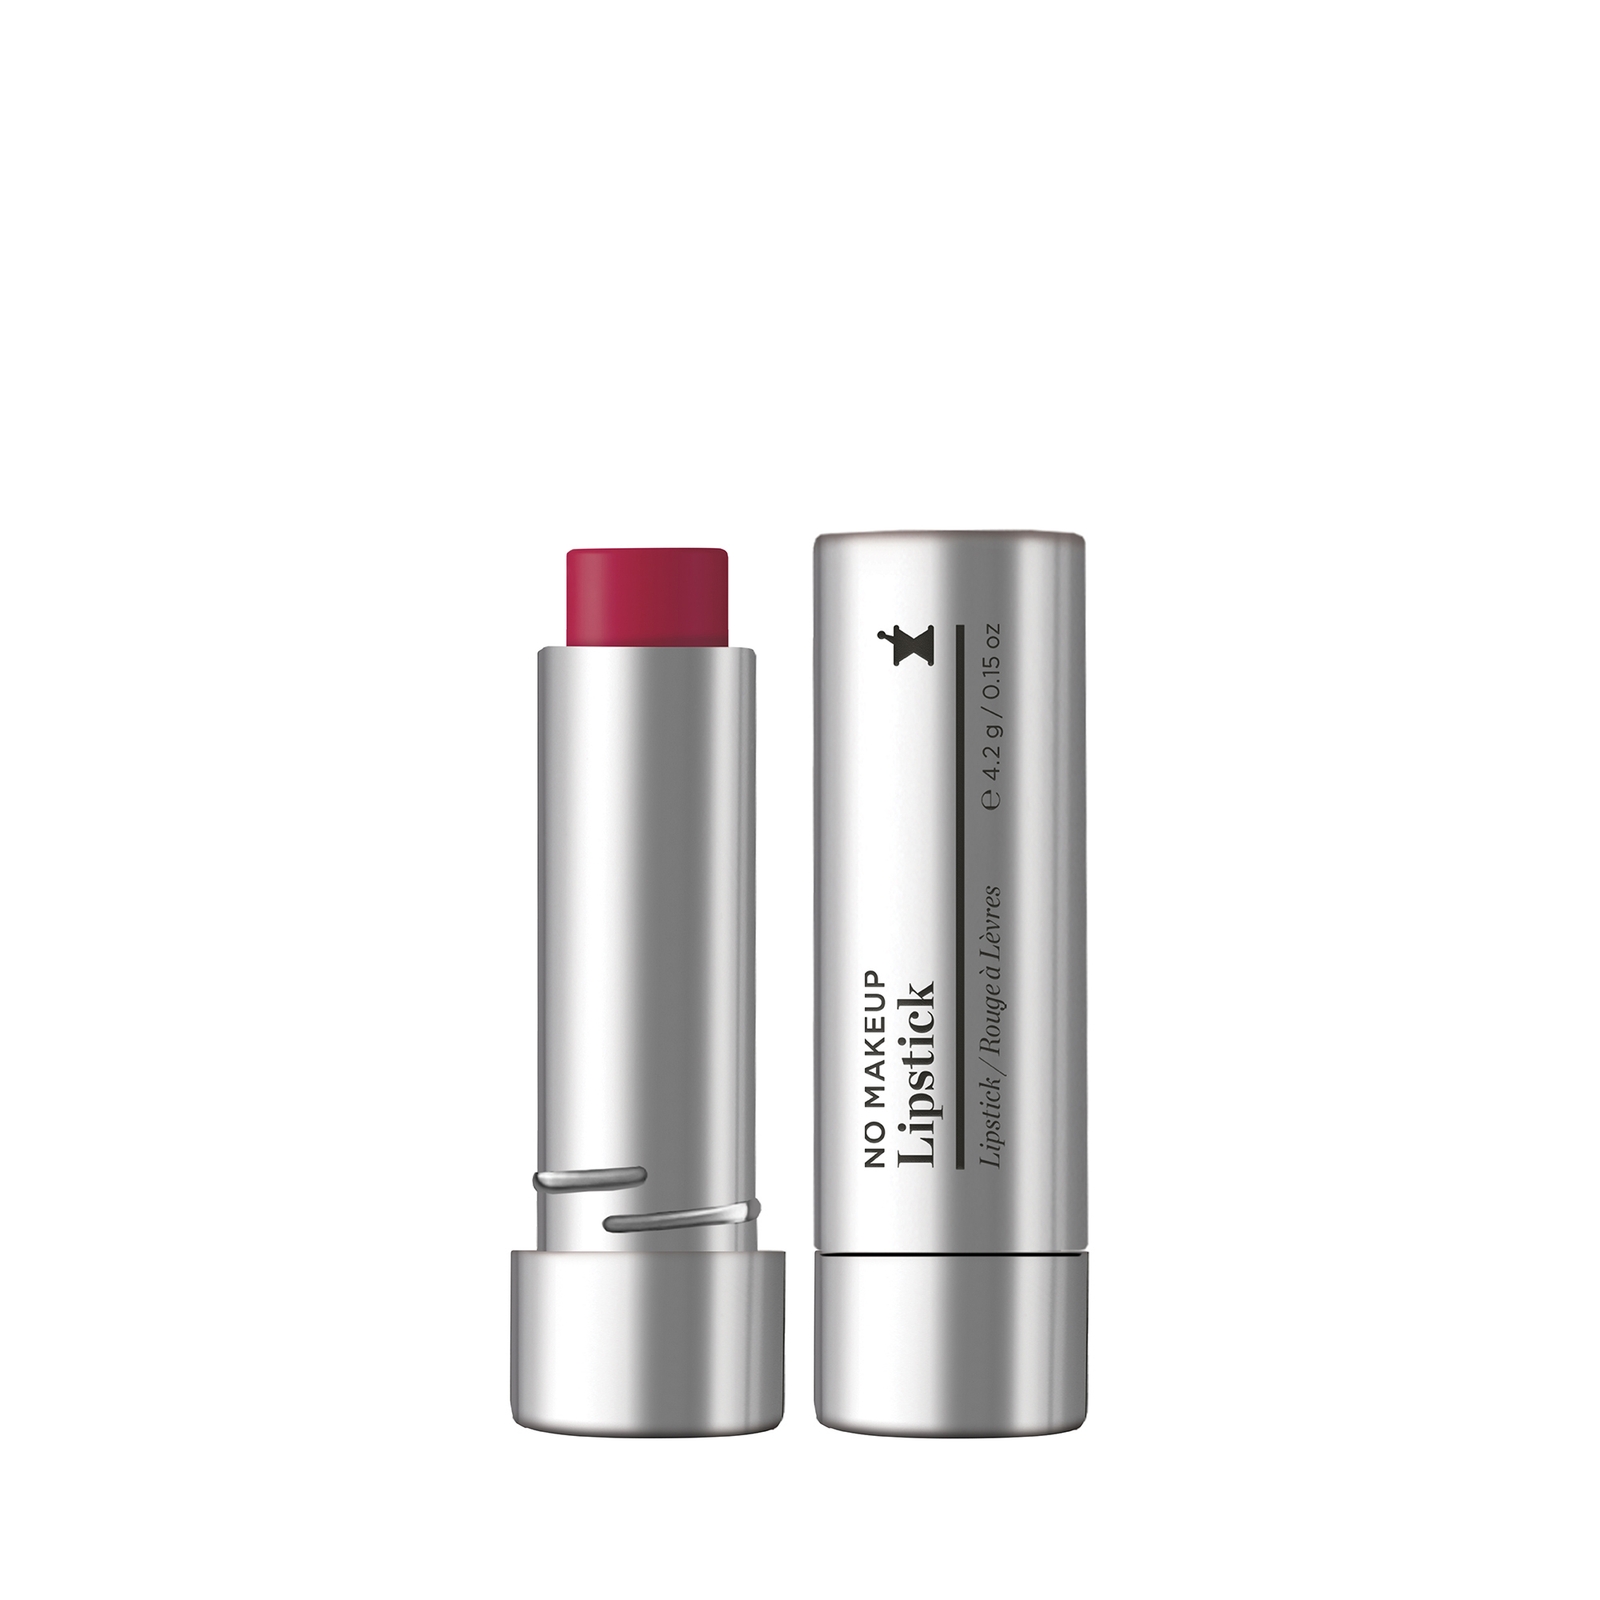 Perricone Md No Makeup Lipstick 4.5g (various Shades) In Red